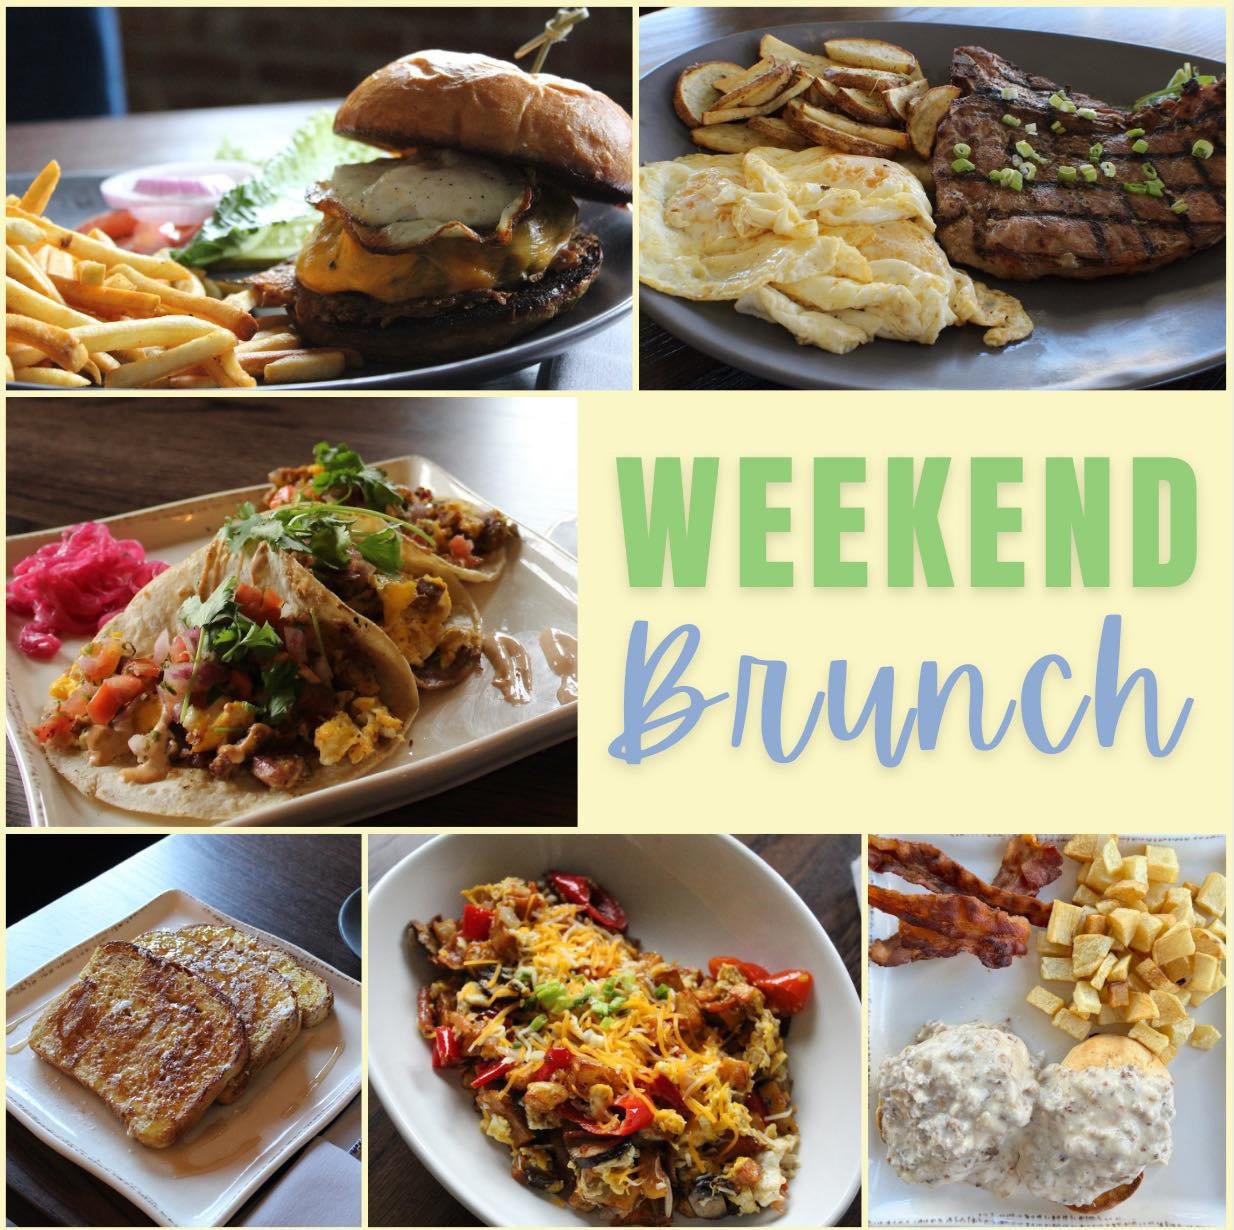 🌟 Join us this weekend at Powerhouse Social for an unforgettable brunch experience! Indulge in mouthwatering dishes and sip on refreshing mimosas that will kickstart your weekend. Don't miss out on the perfect combination of amazing food and great v